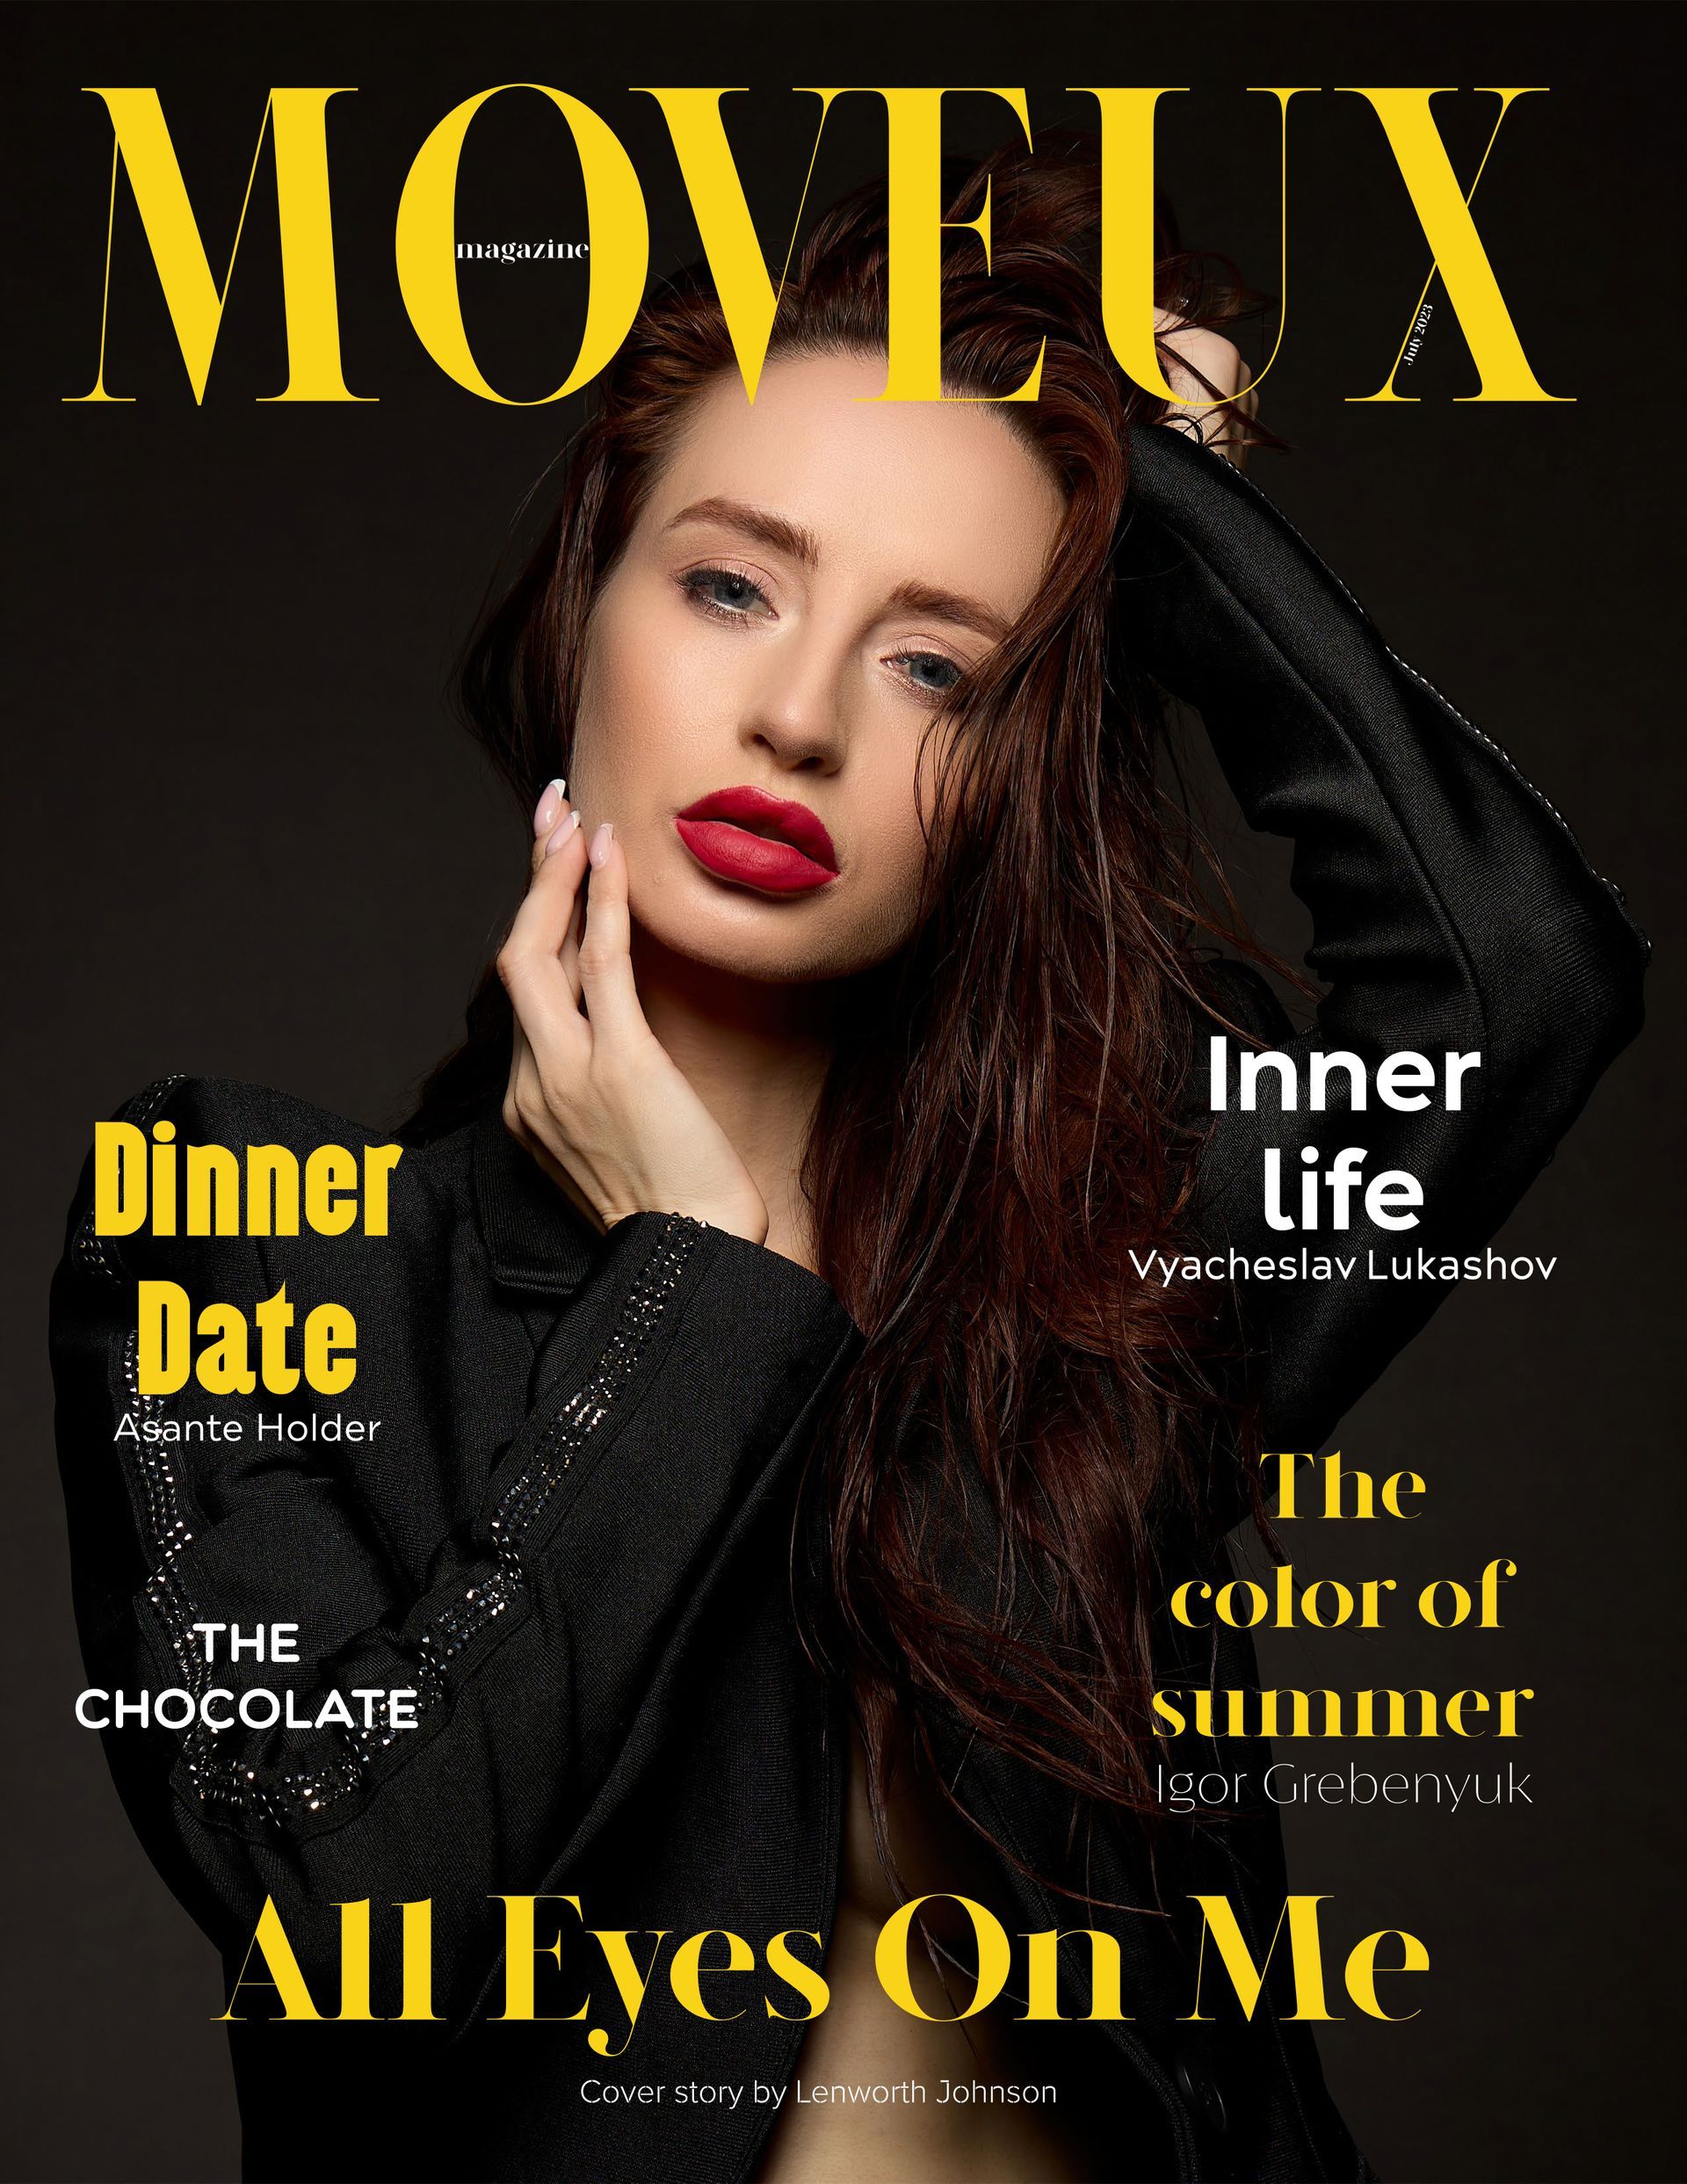 Moveux magazine cover with Miss Texas top model.